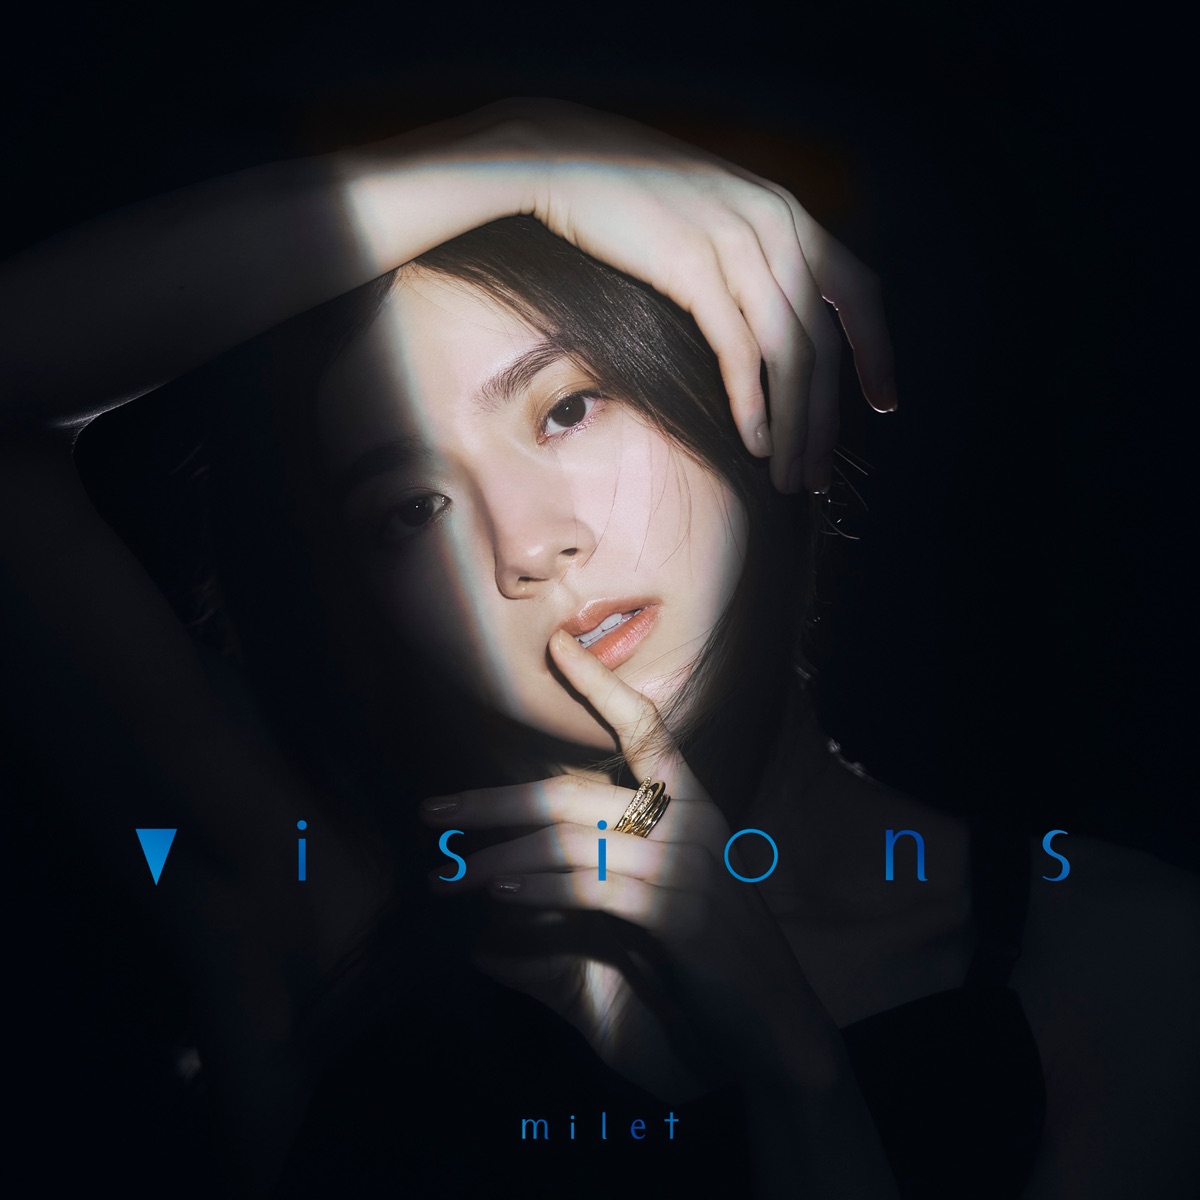 『milet - Come Here (Session1) 歌詞』収録の『visions』ジャケット